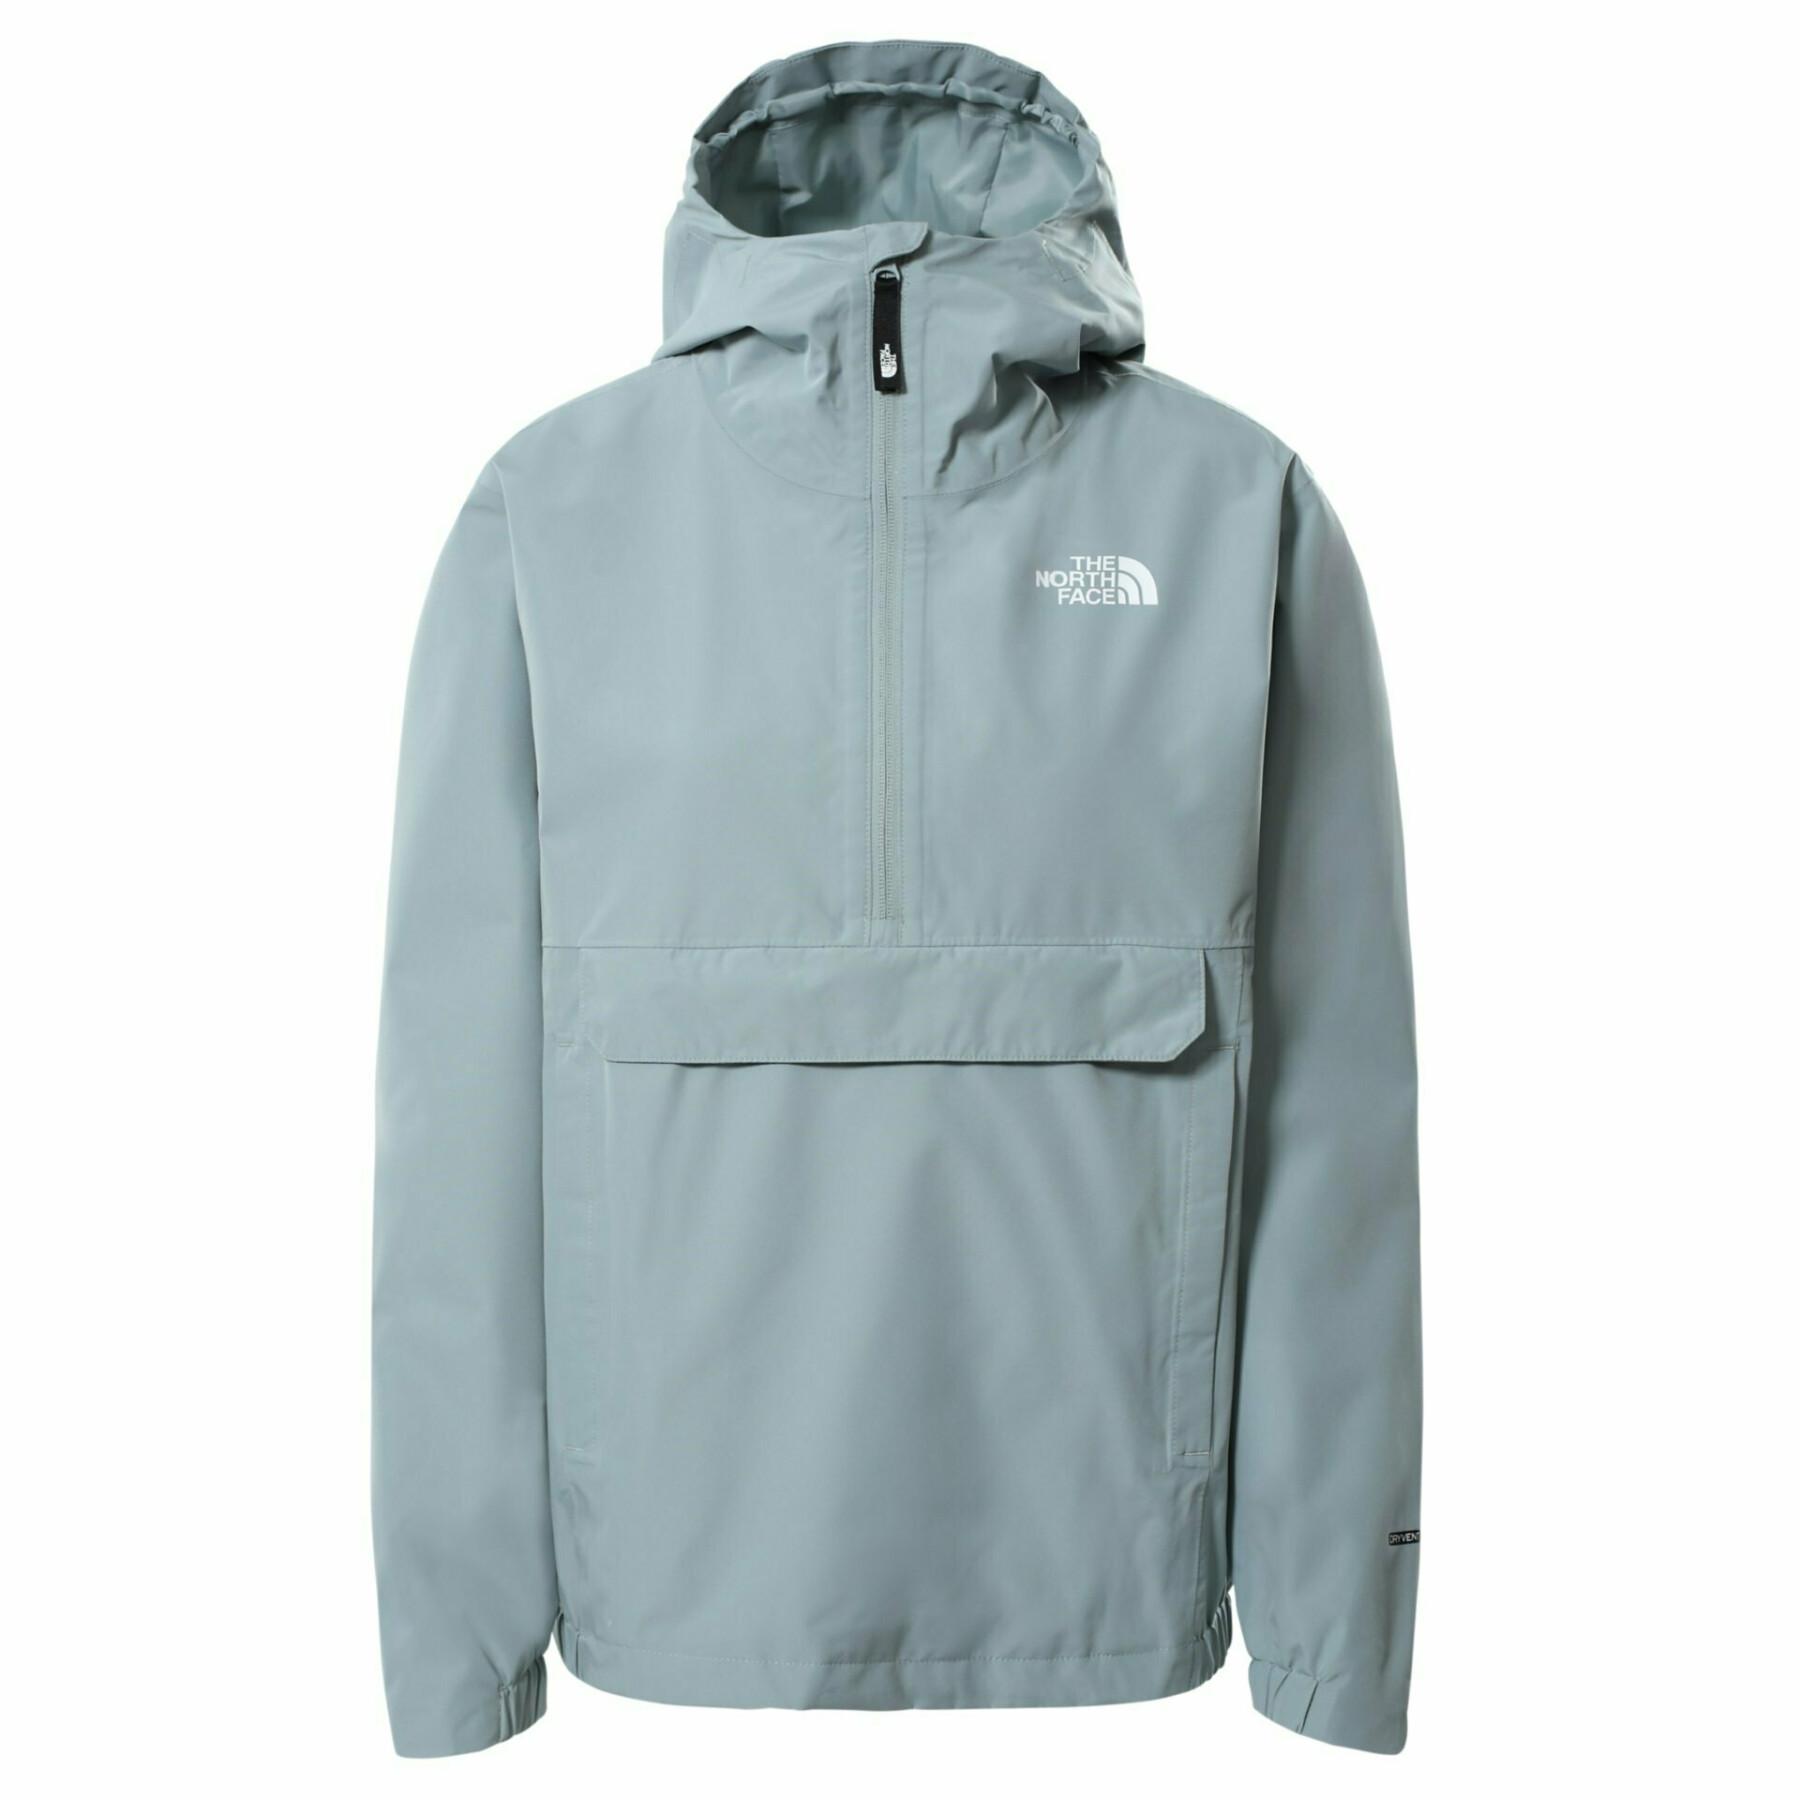 Anorak impermeable para mujer The North Face